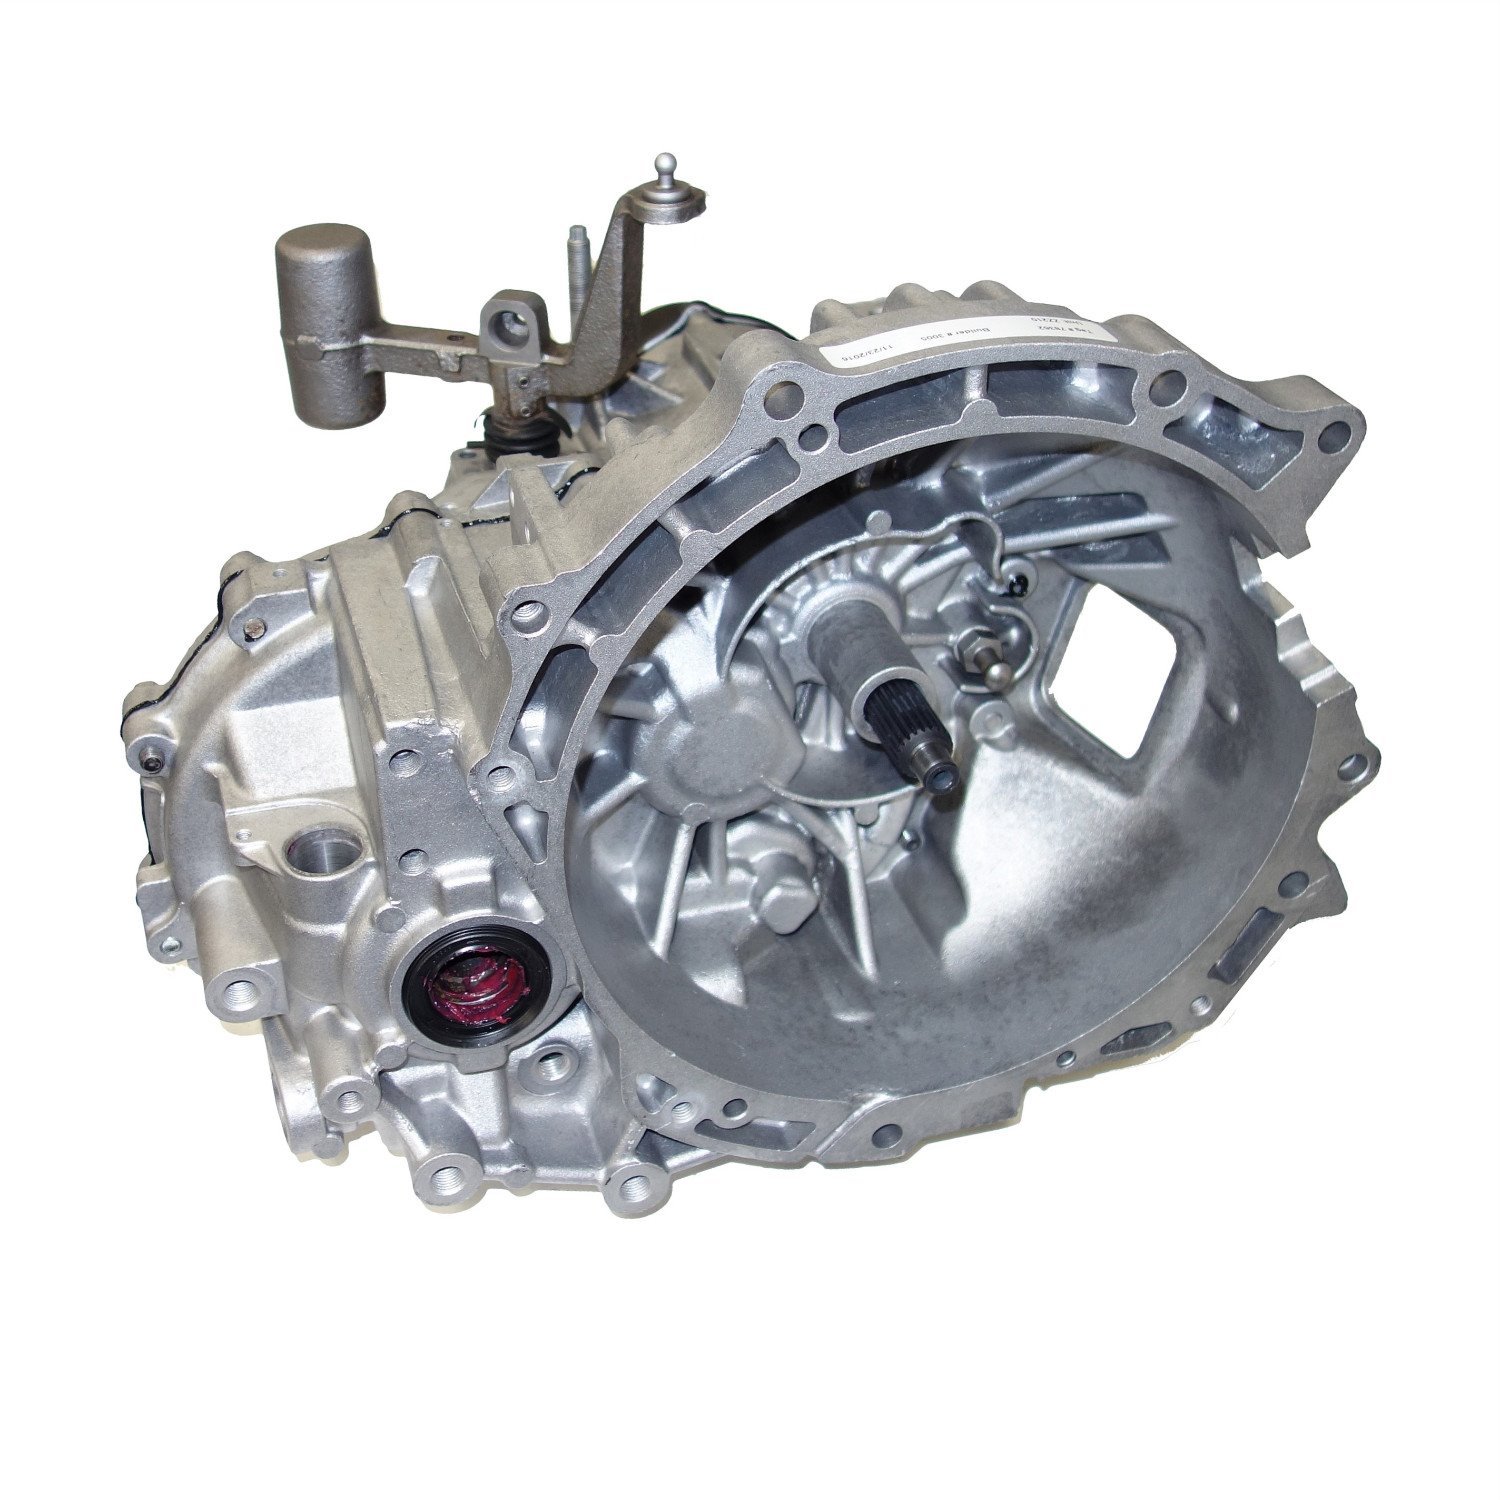 Remanufactured G35M-R M/T 2004-06 Mazda 3 5 Speed, Without ABS